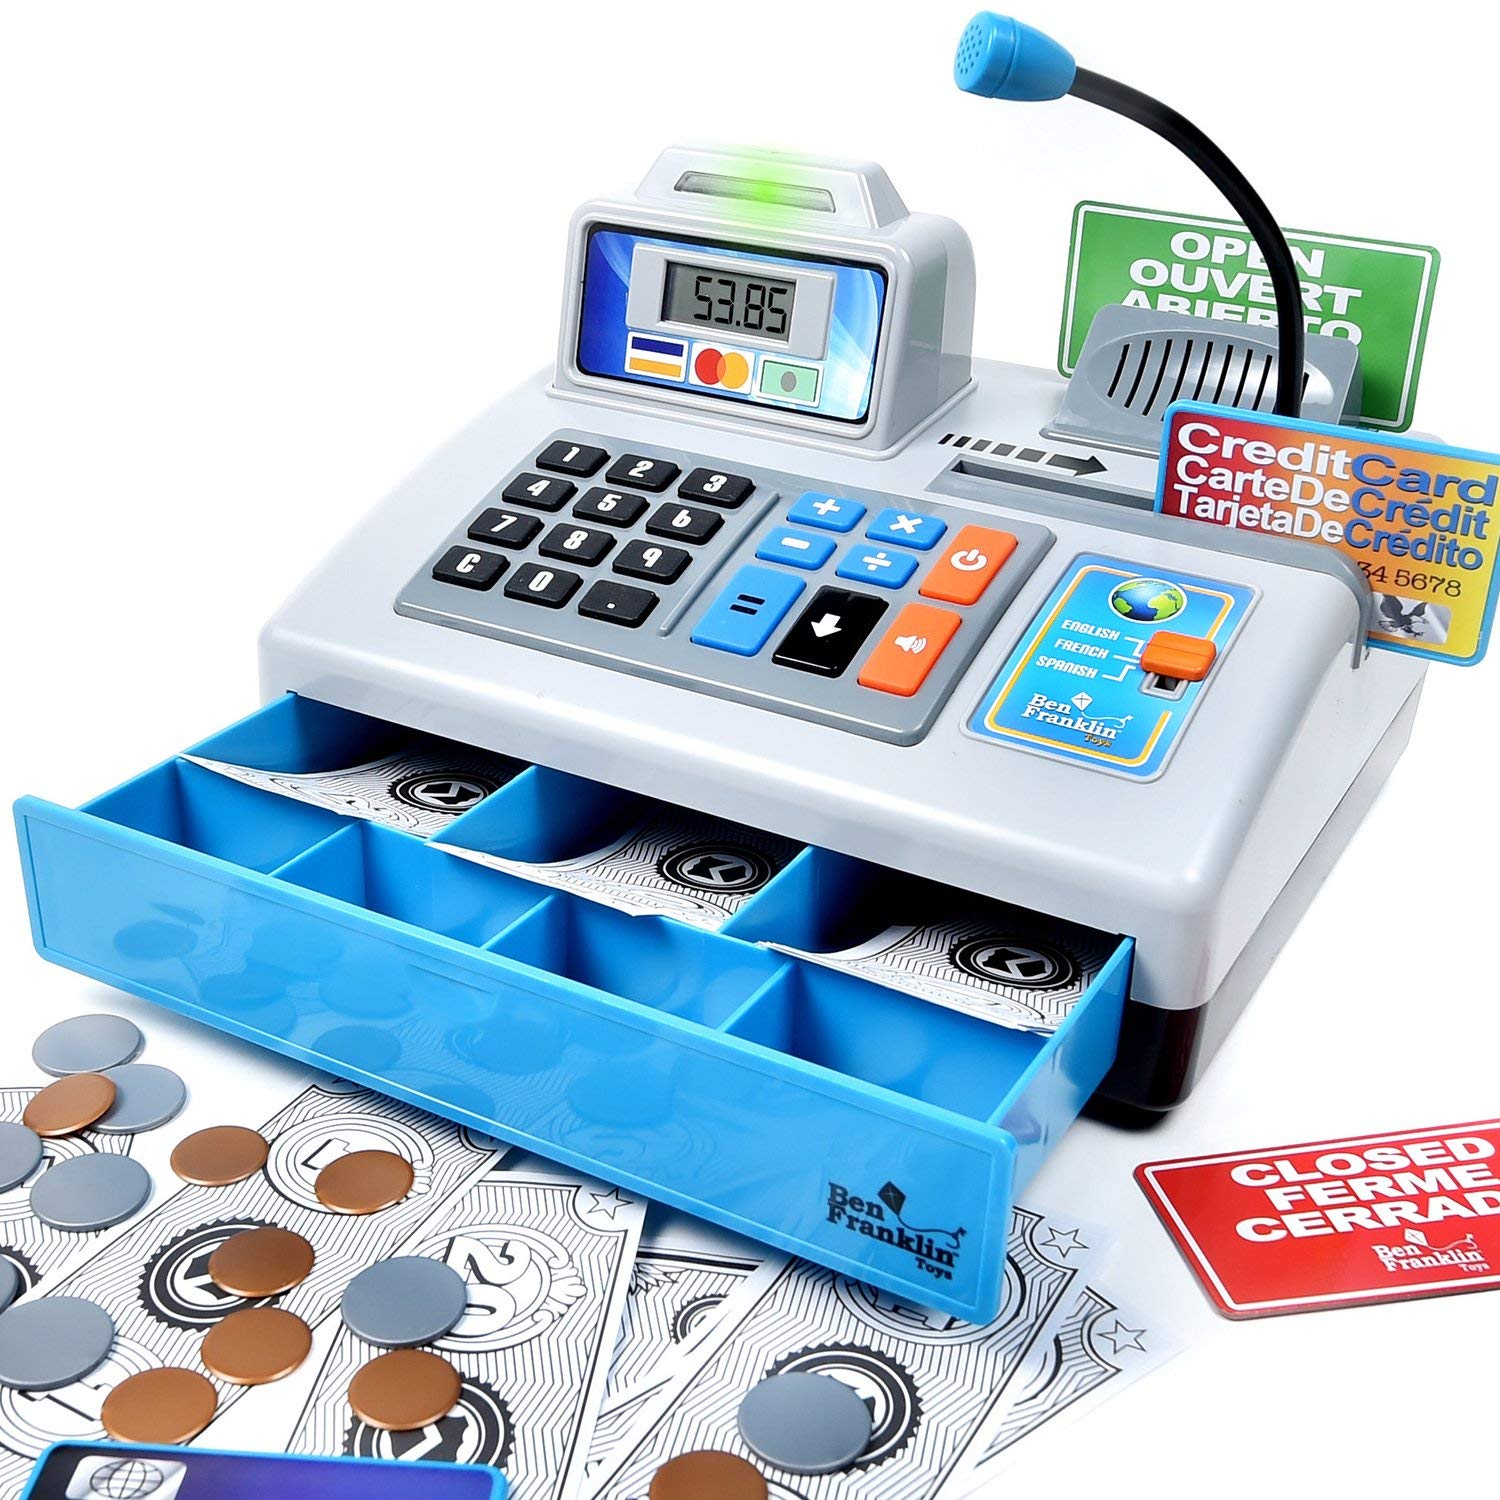 Ben Franklin Toys Talking Toy Cash Register - STEM Learning 69 Piece Pretend Store with 3 Languages, Paging Microphone, Credit Card, Bank Card, Play Money and Banking for Kids, Silver